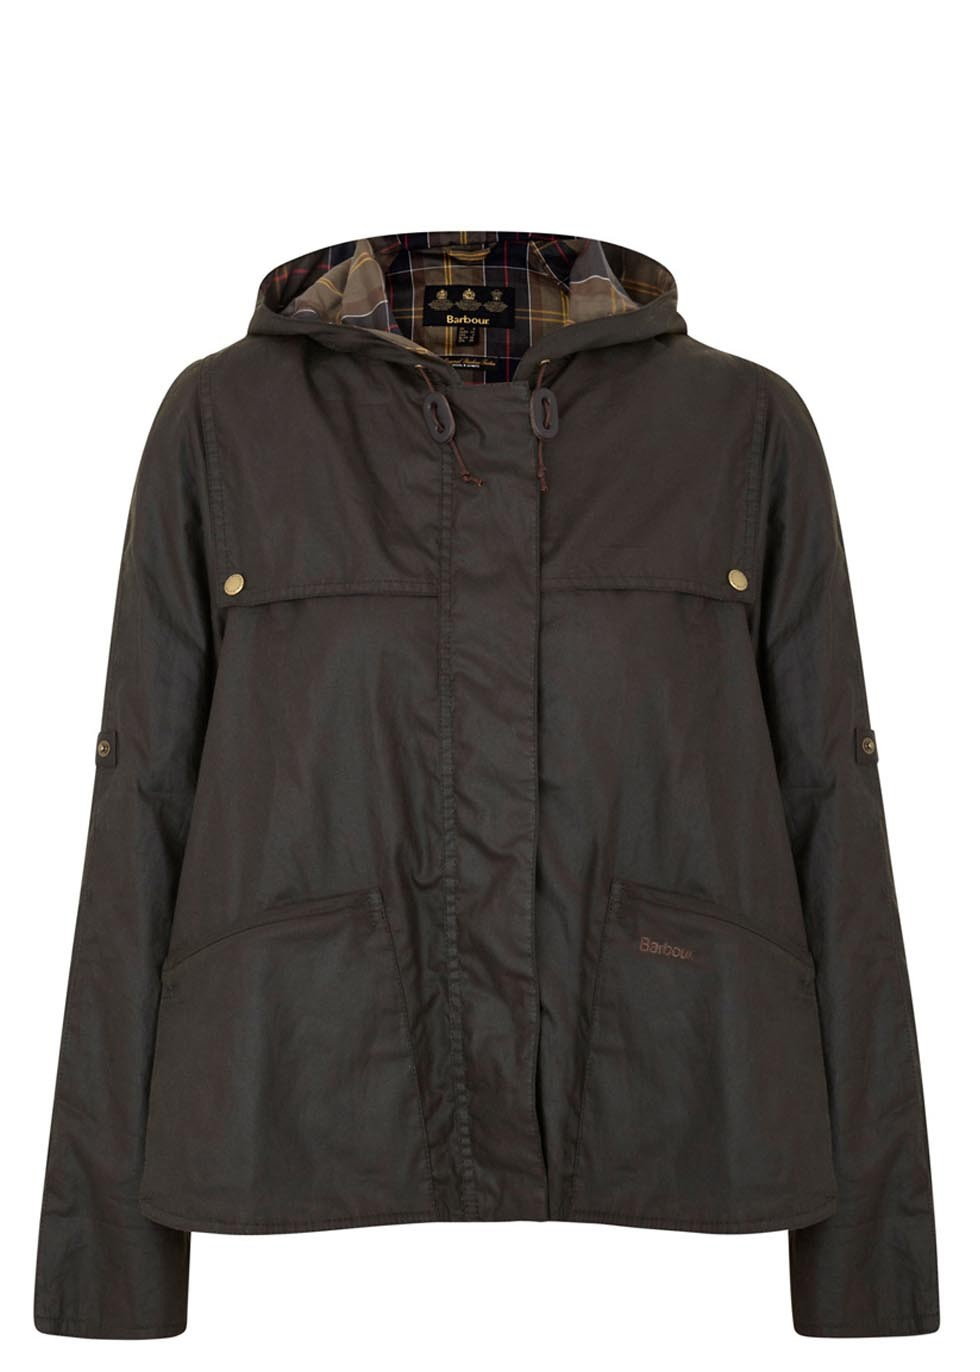 Barbour Heron Olive Waxed Cotton Jacket in Green (olive) | Lyst